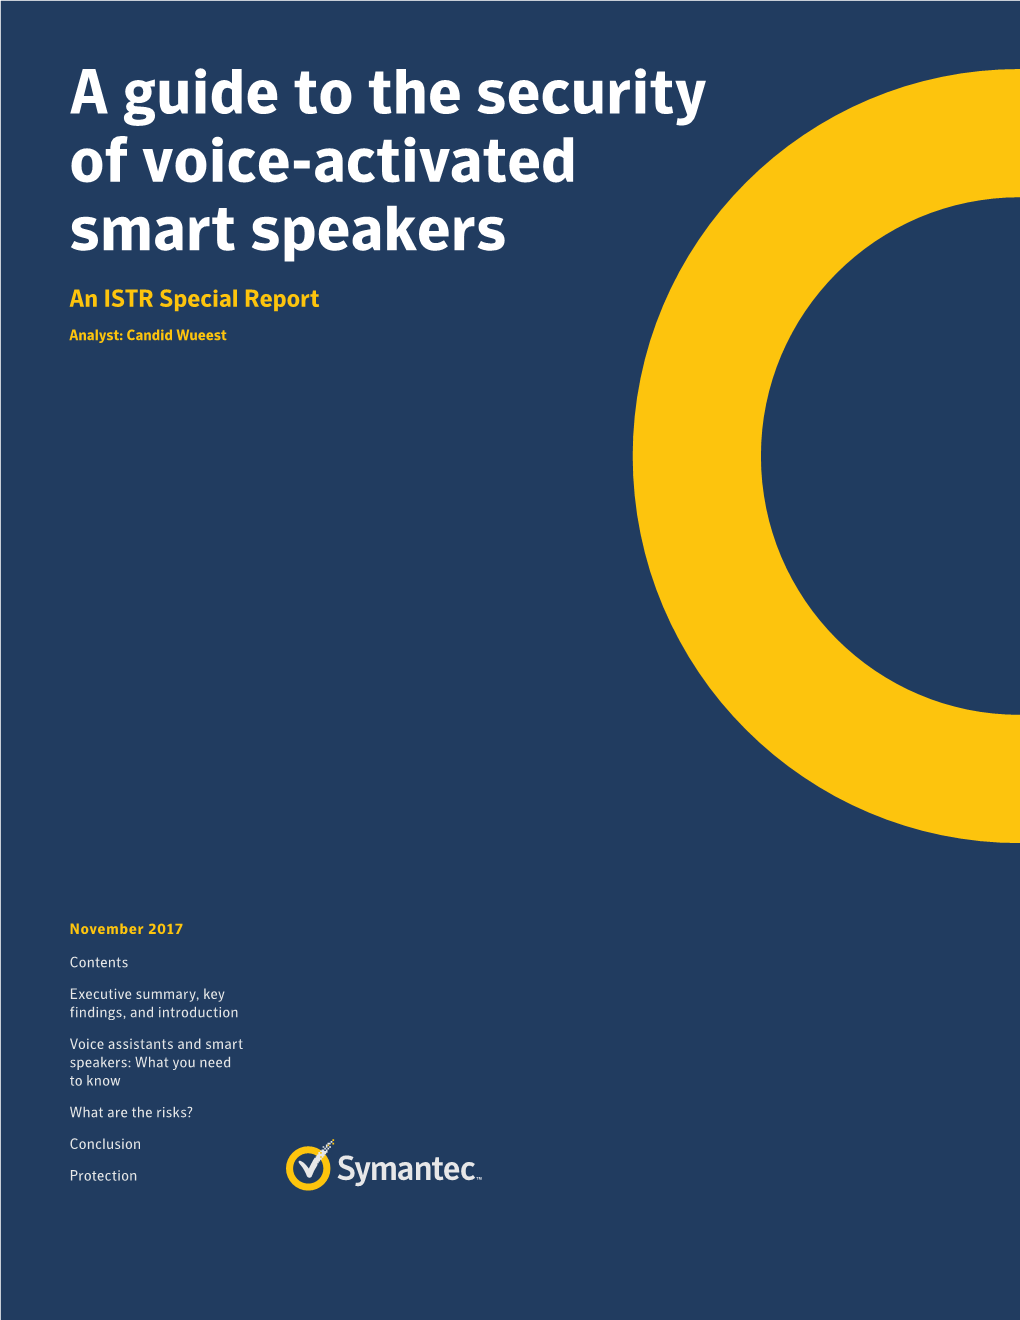 A Guide to the Security of Voice-Activated Smart Speakers an ISTR Special Report